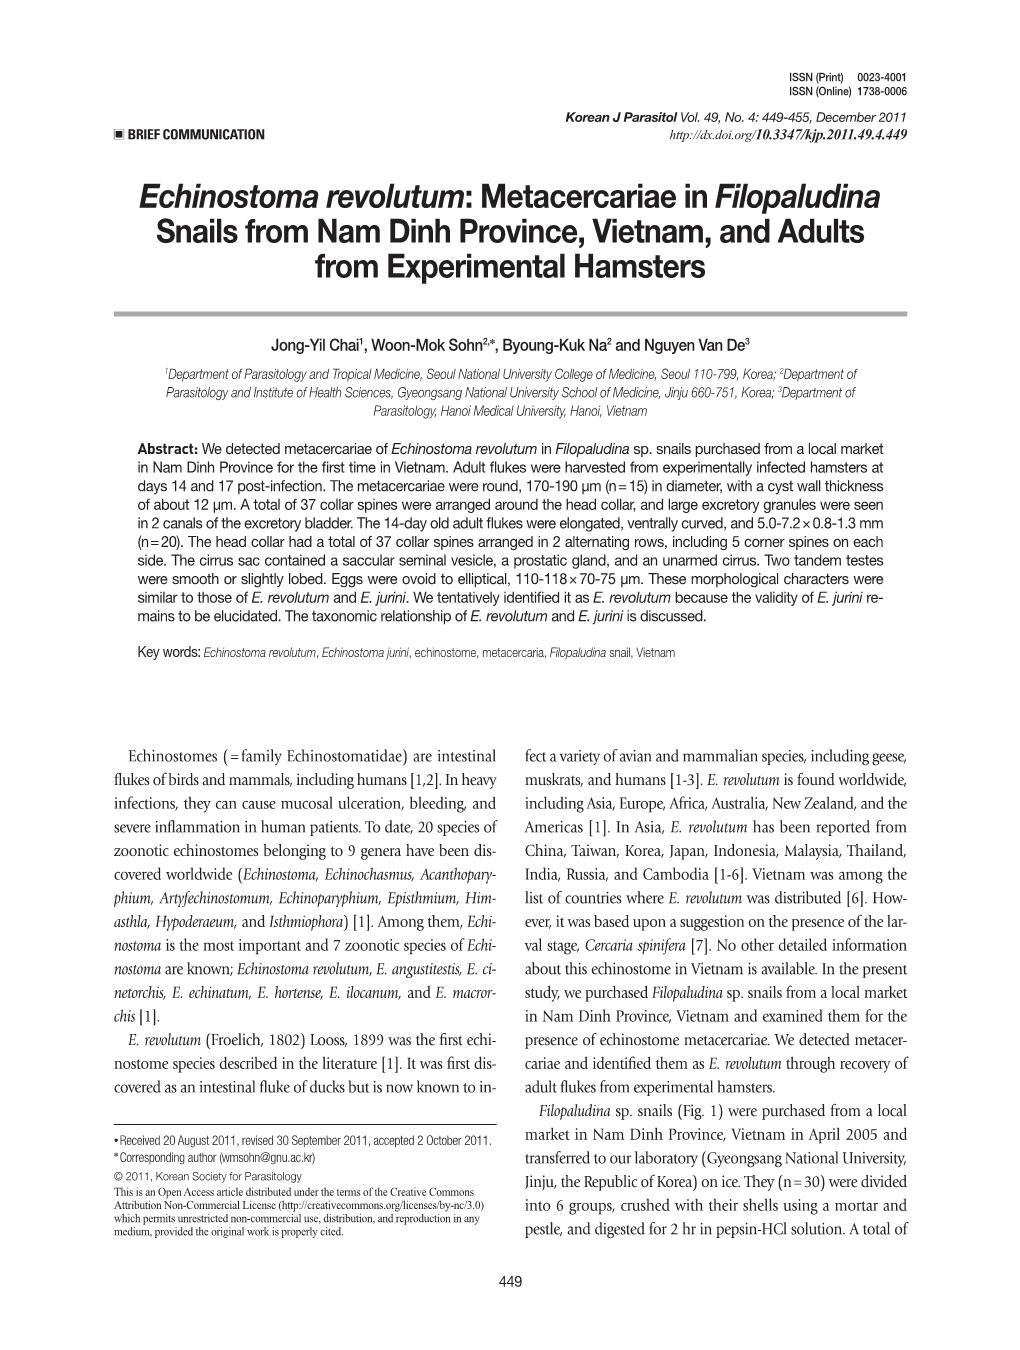 Echinostoma Revolutum: Metacercariae in Filopaludina Snails from Nam Dinh Province, Vietnam, and Adults from Experimental Hamsters